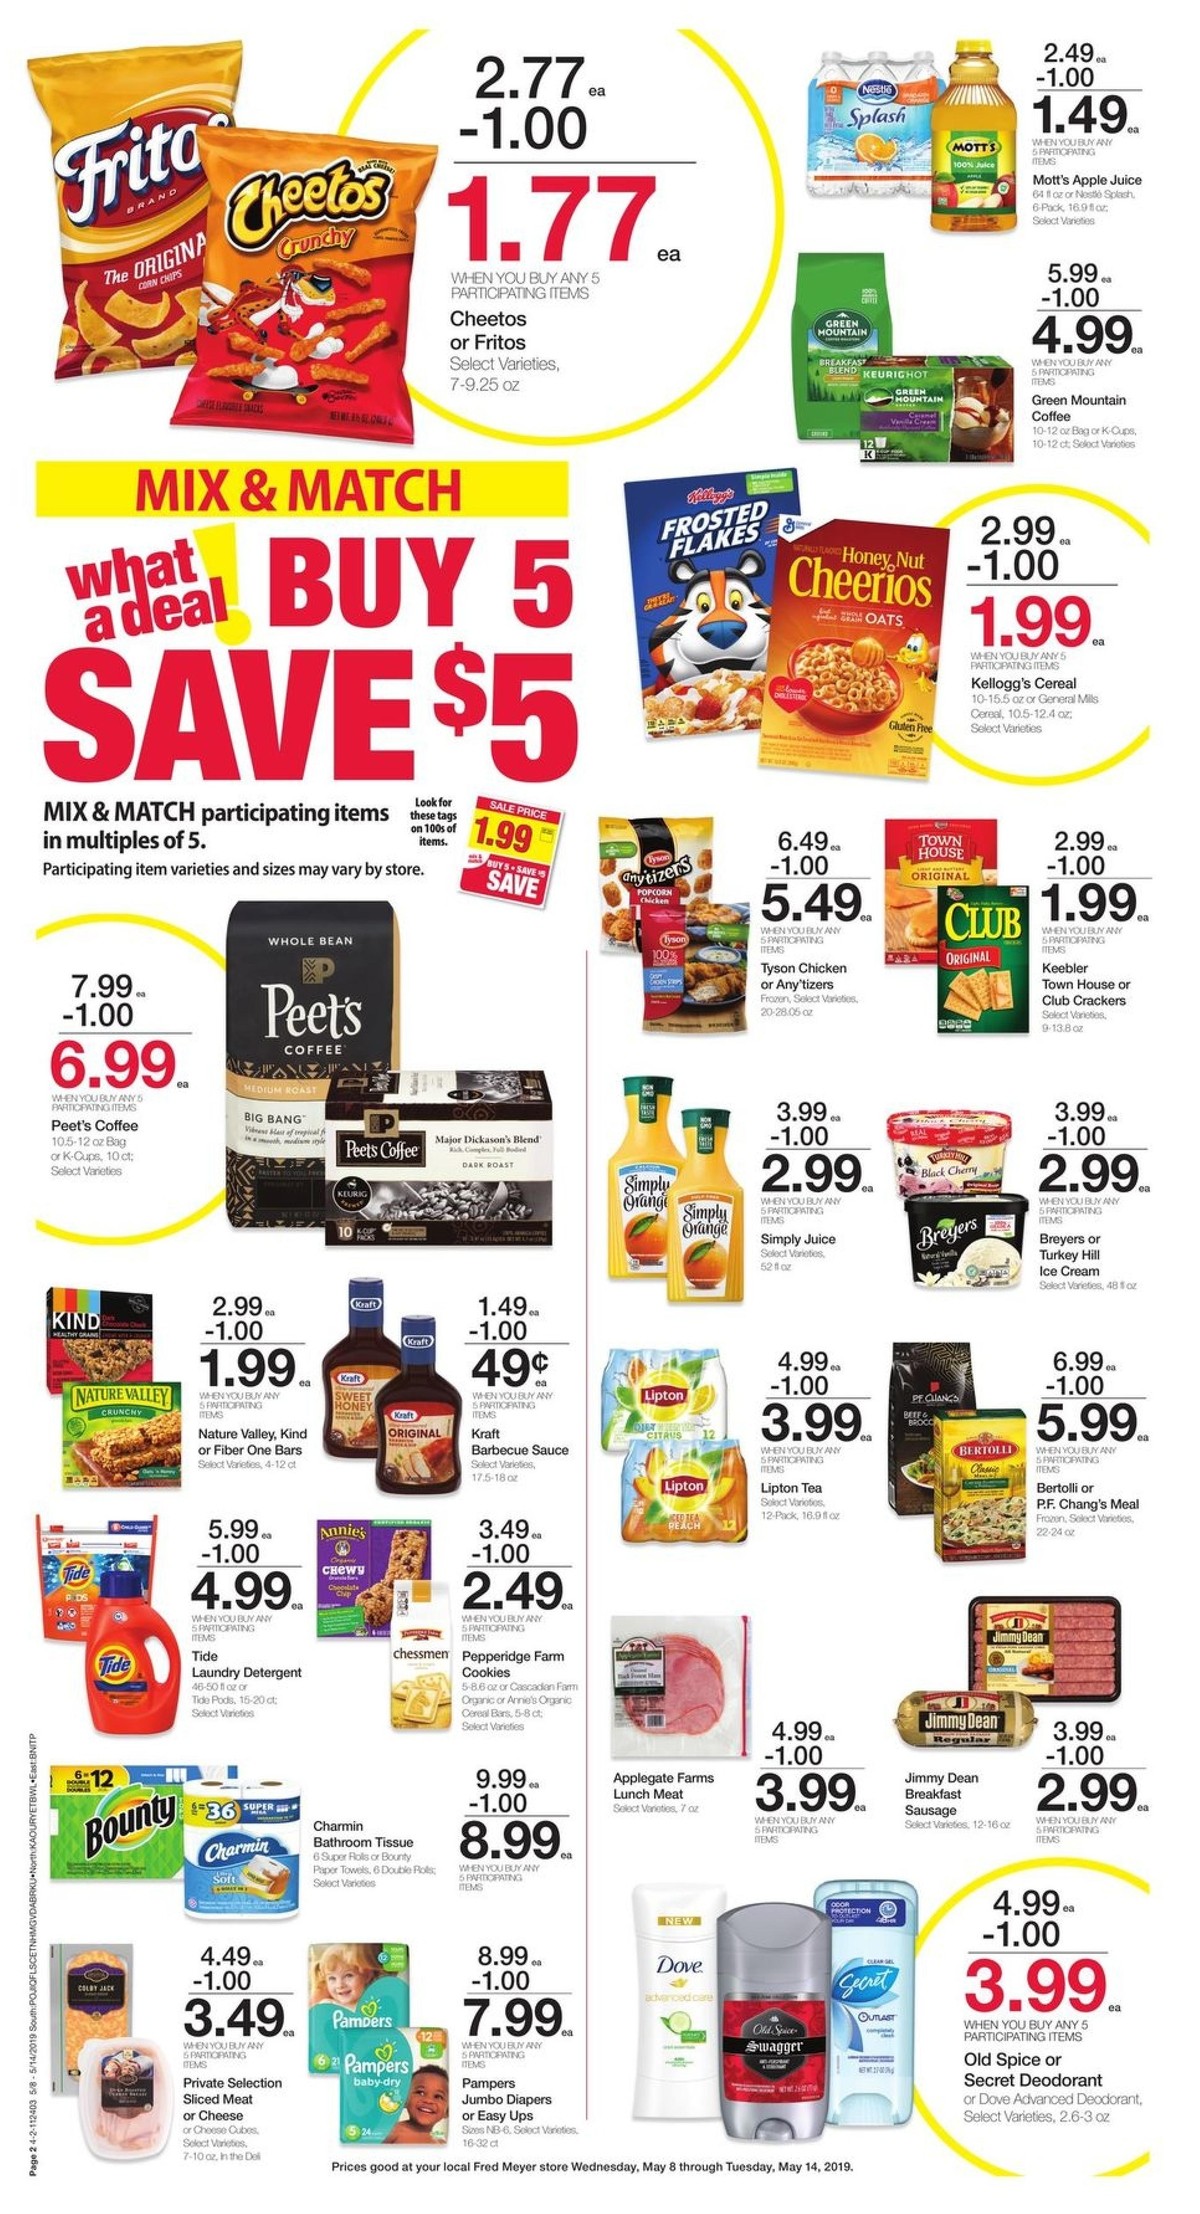 Fred Meyer Weekly Ad from May 8